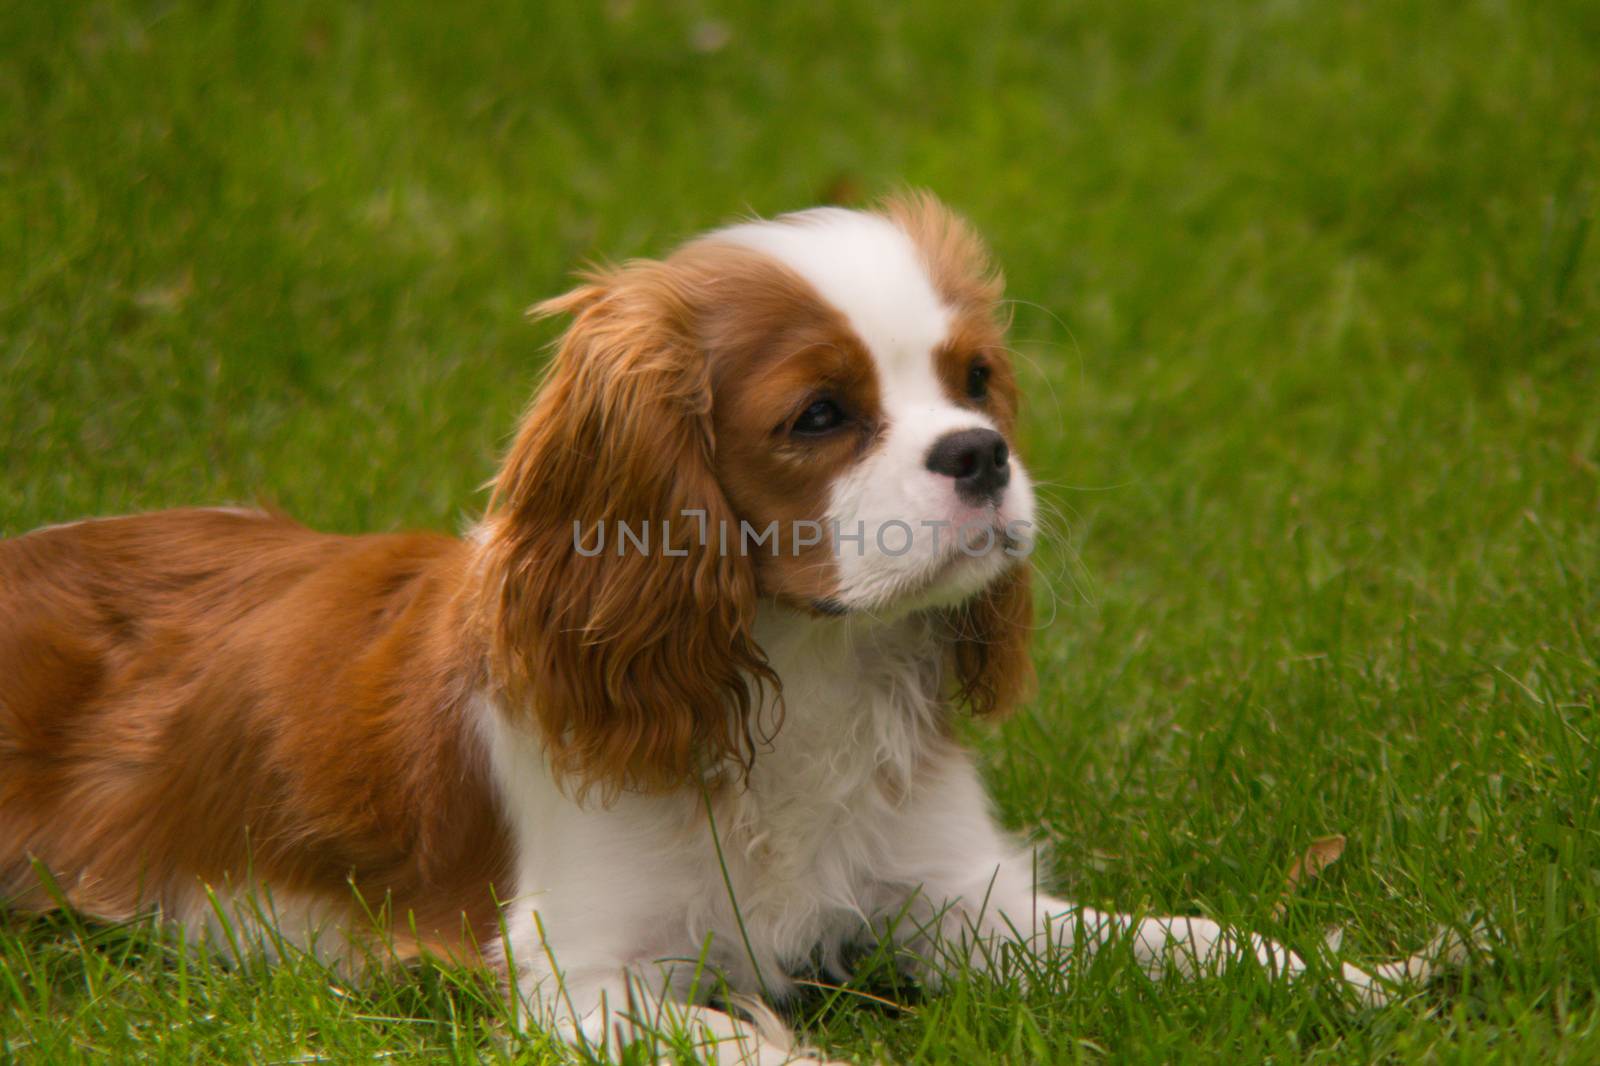 Cavalier King Charles Spaniel Lying in Grass by colintemple